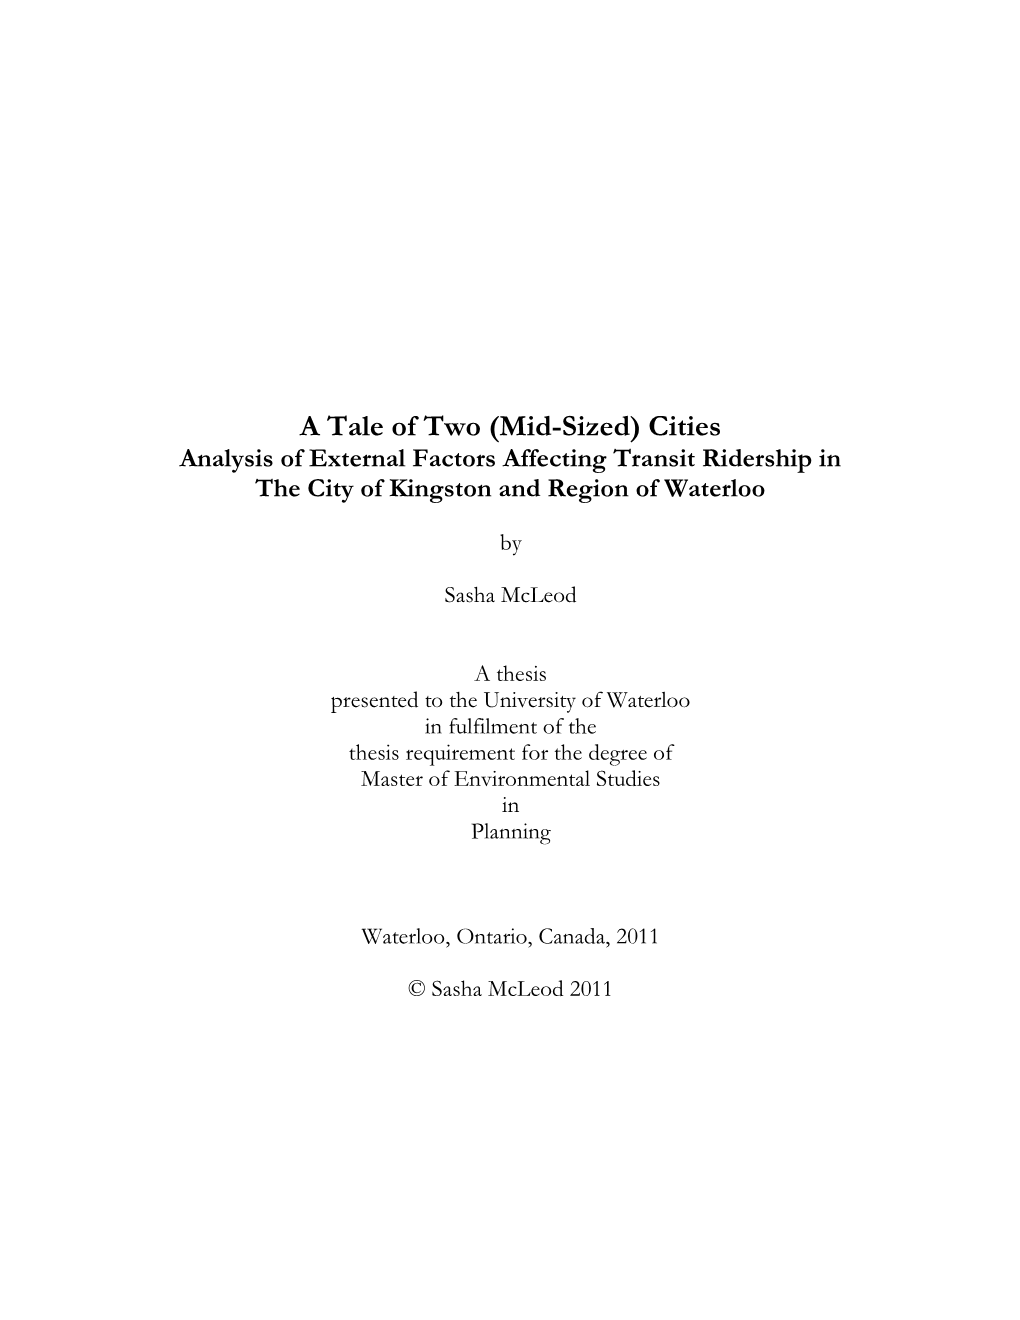 Mid-Sized) Cities Analysis of External Factors Affecting Transit Ridership in the City of Kingston and Region of Waterloo